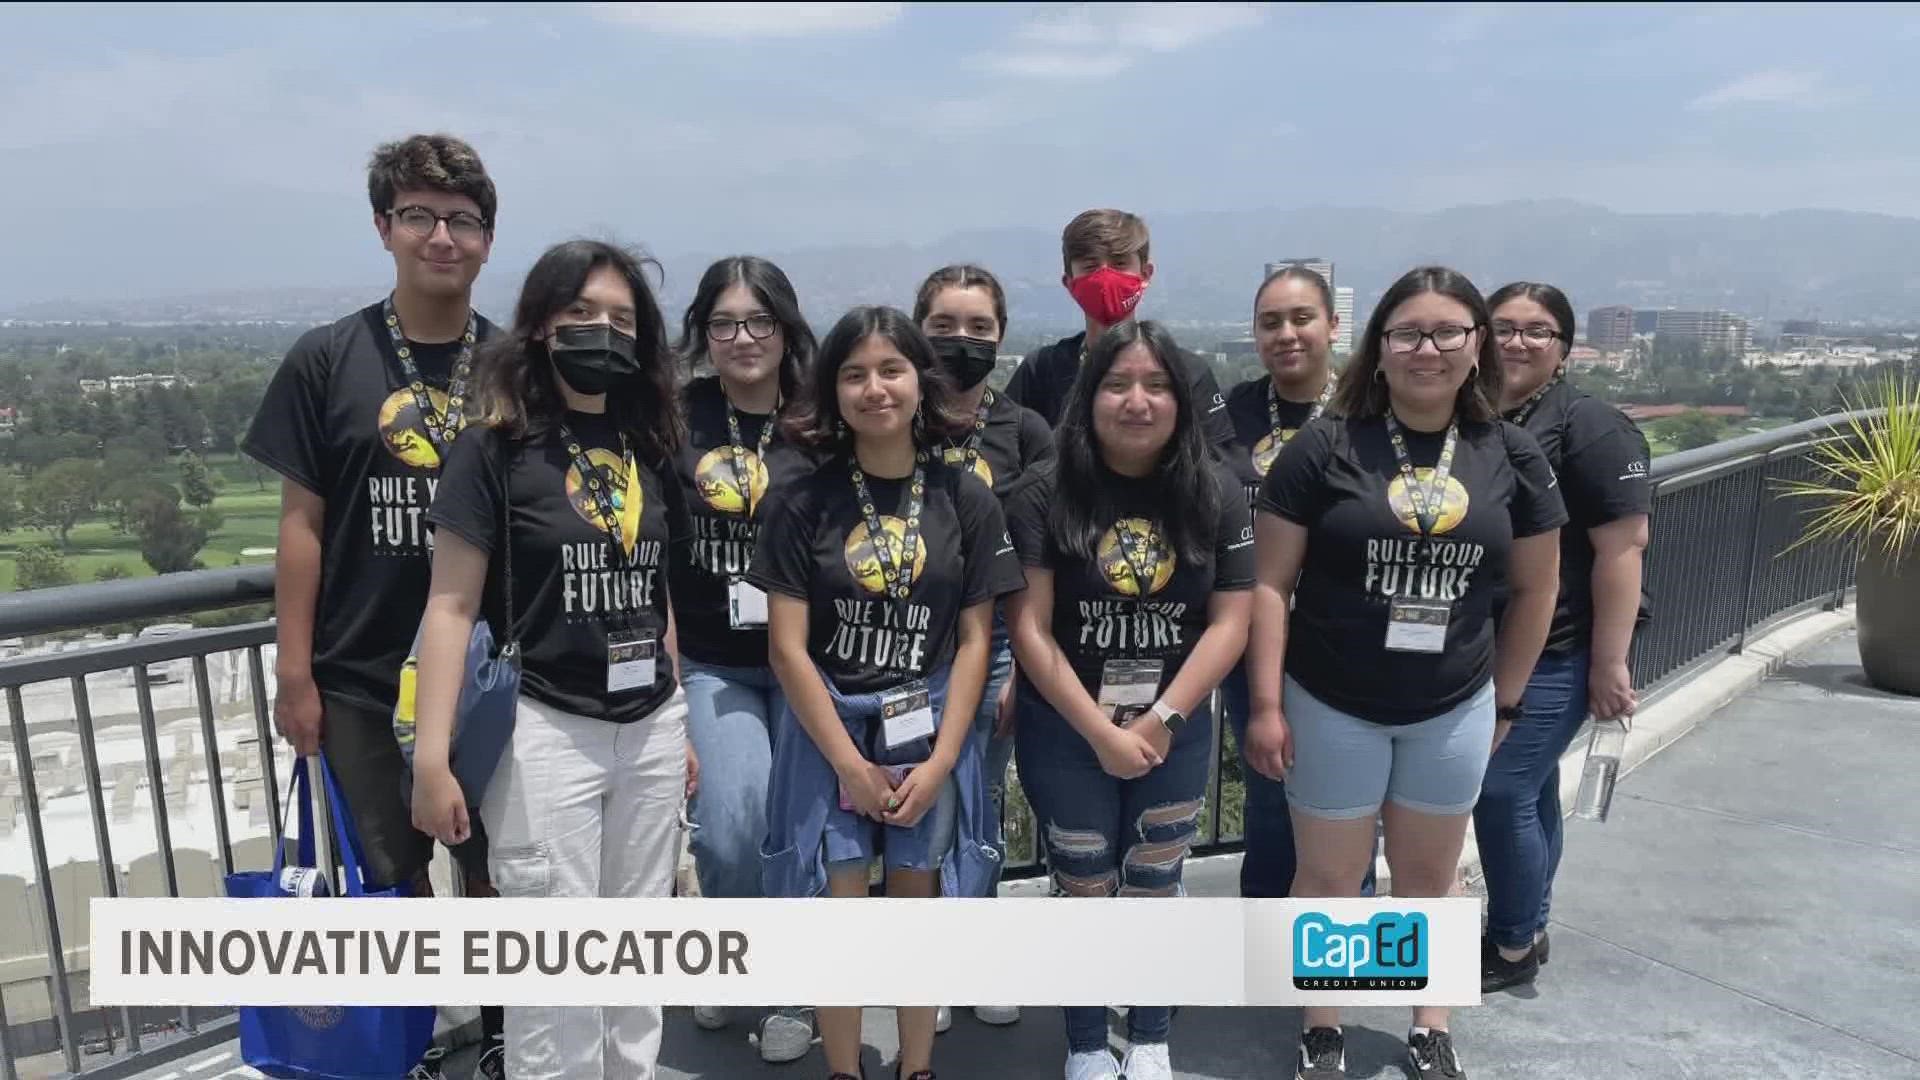 Last June, 10 Caldwell High School students flew to Los Angeles to participate in the 'Jurassic World Rule Your Future STEAM Symposium.'